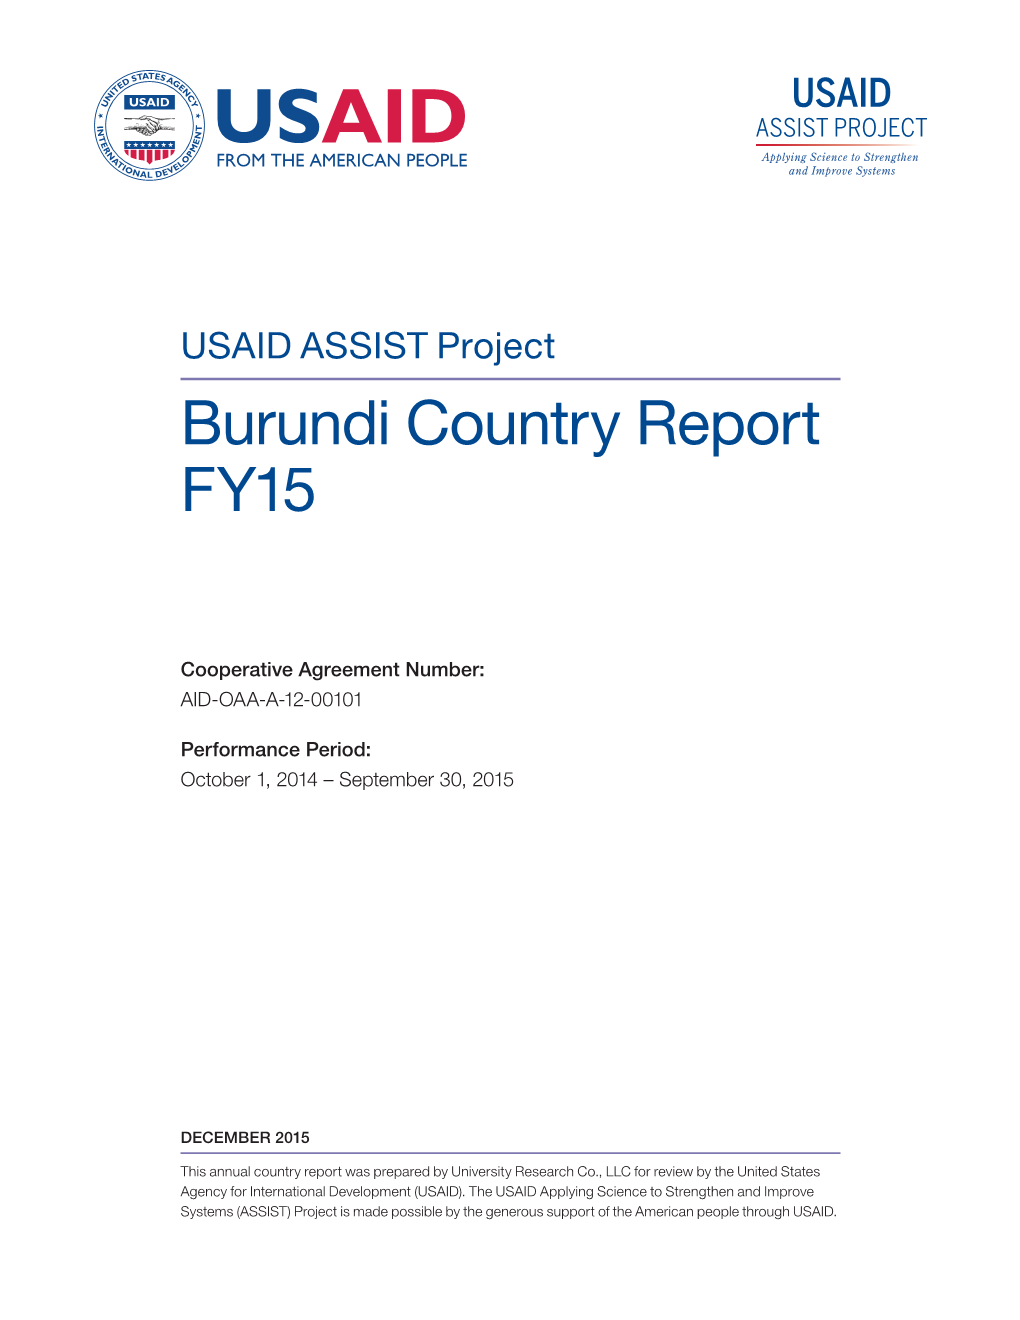 USAID ASSIST Project: Burundi Country Report FY15